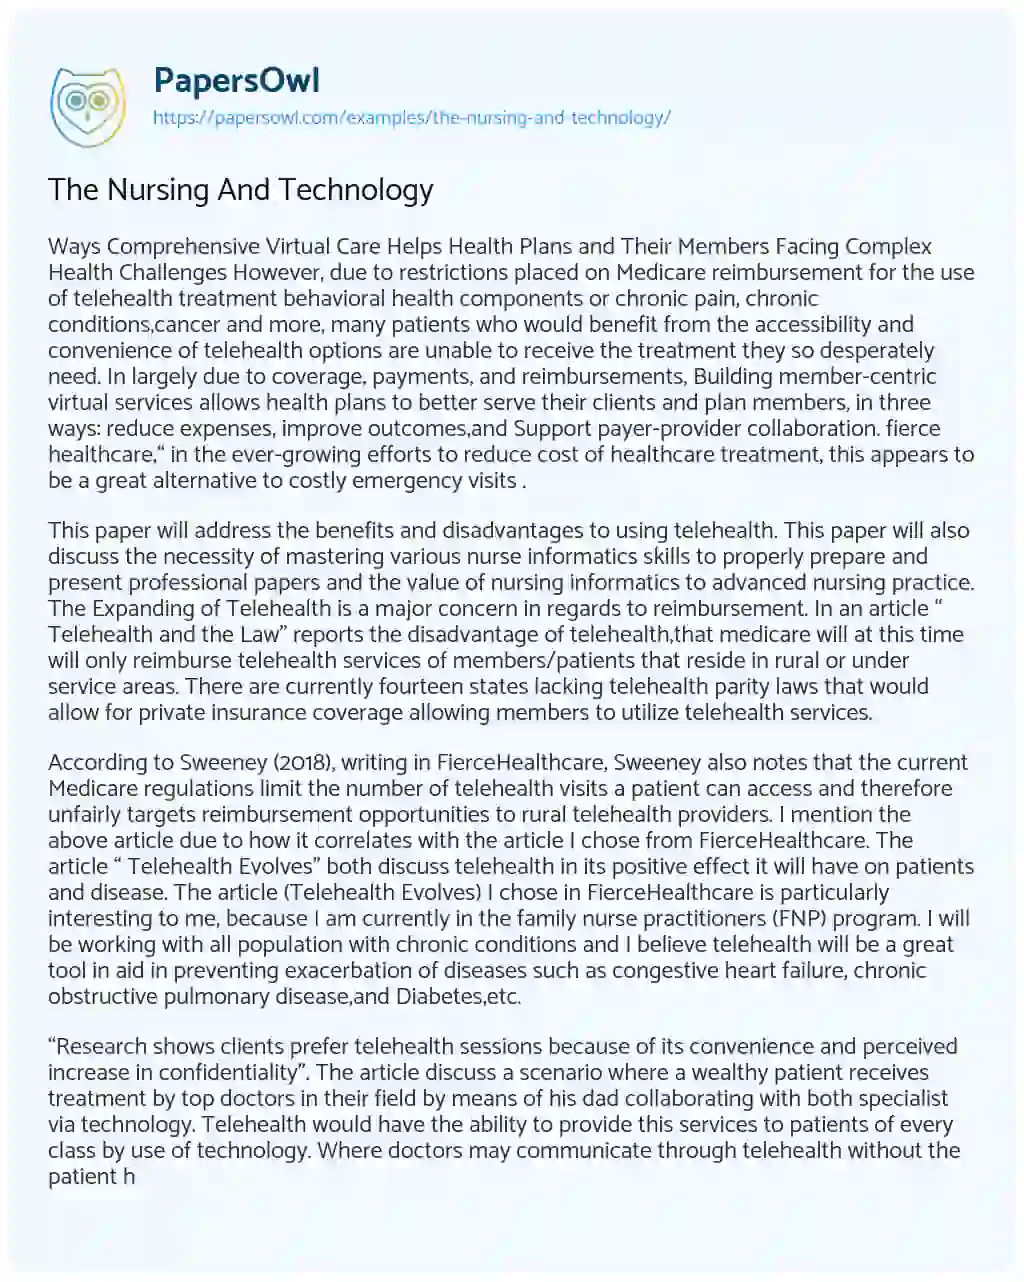 Essay on The Nursing and Technology